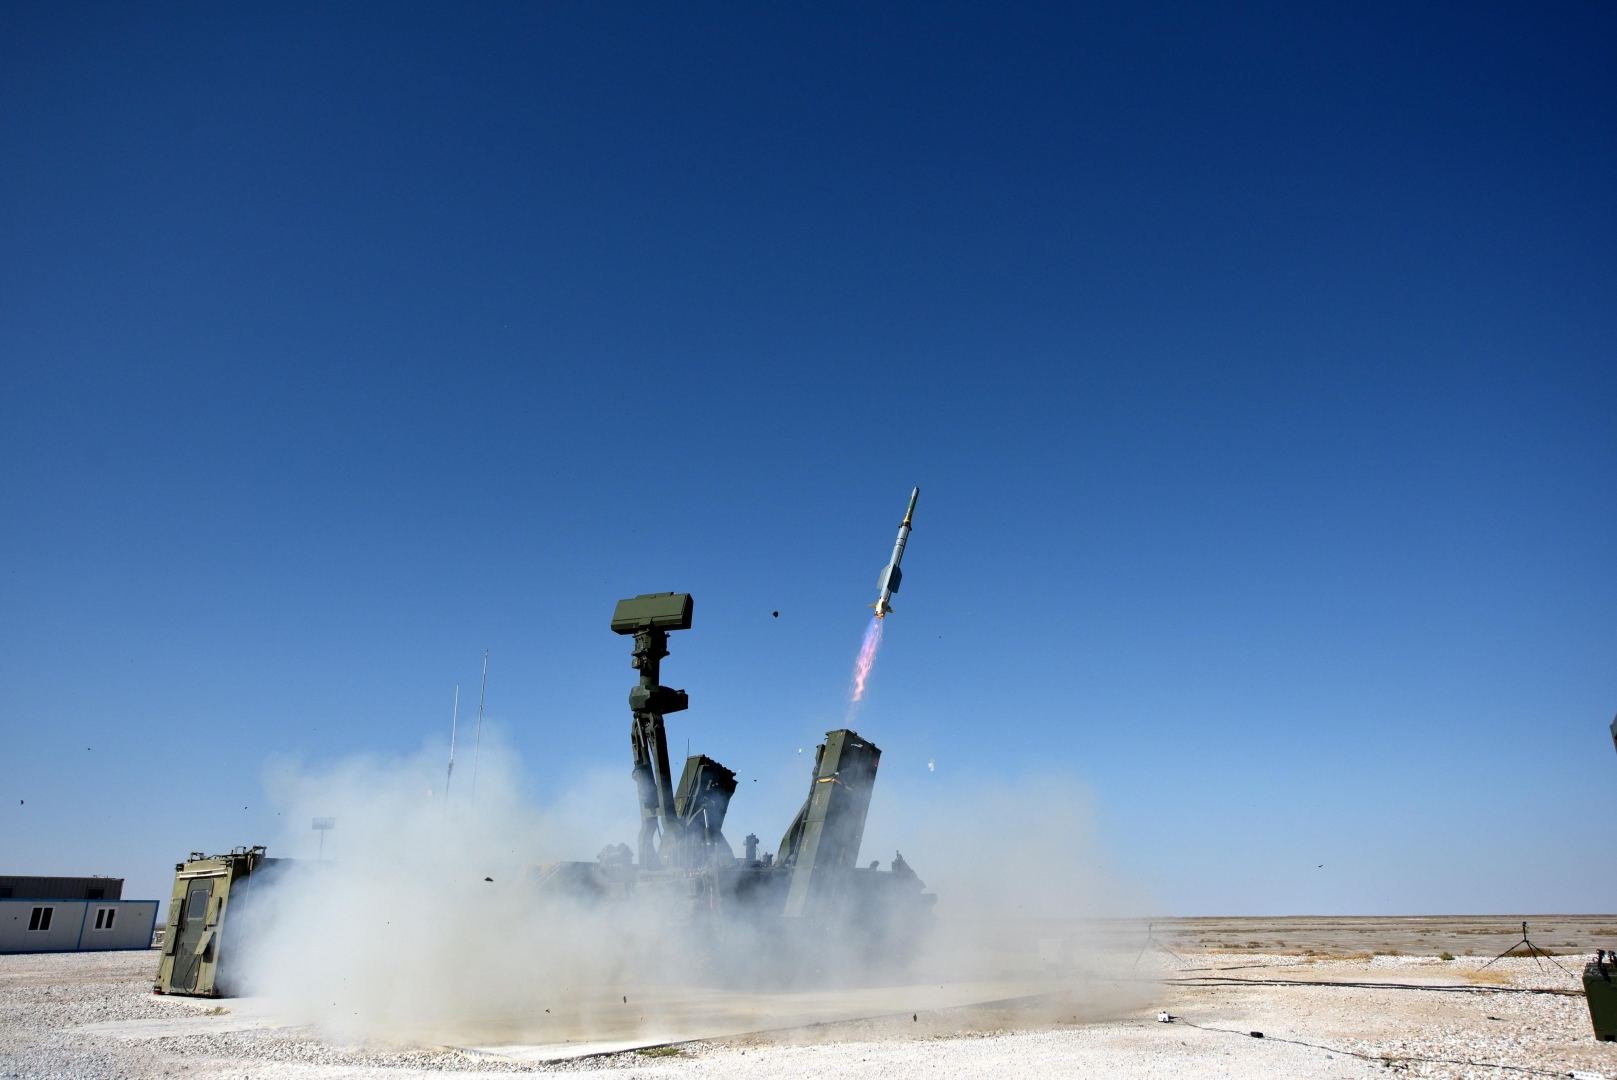 Türkiye’s SIPER missile successfully completed its last test